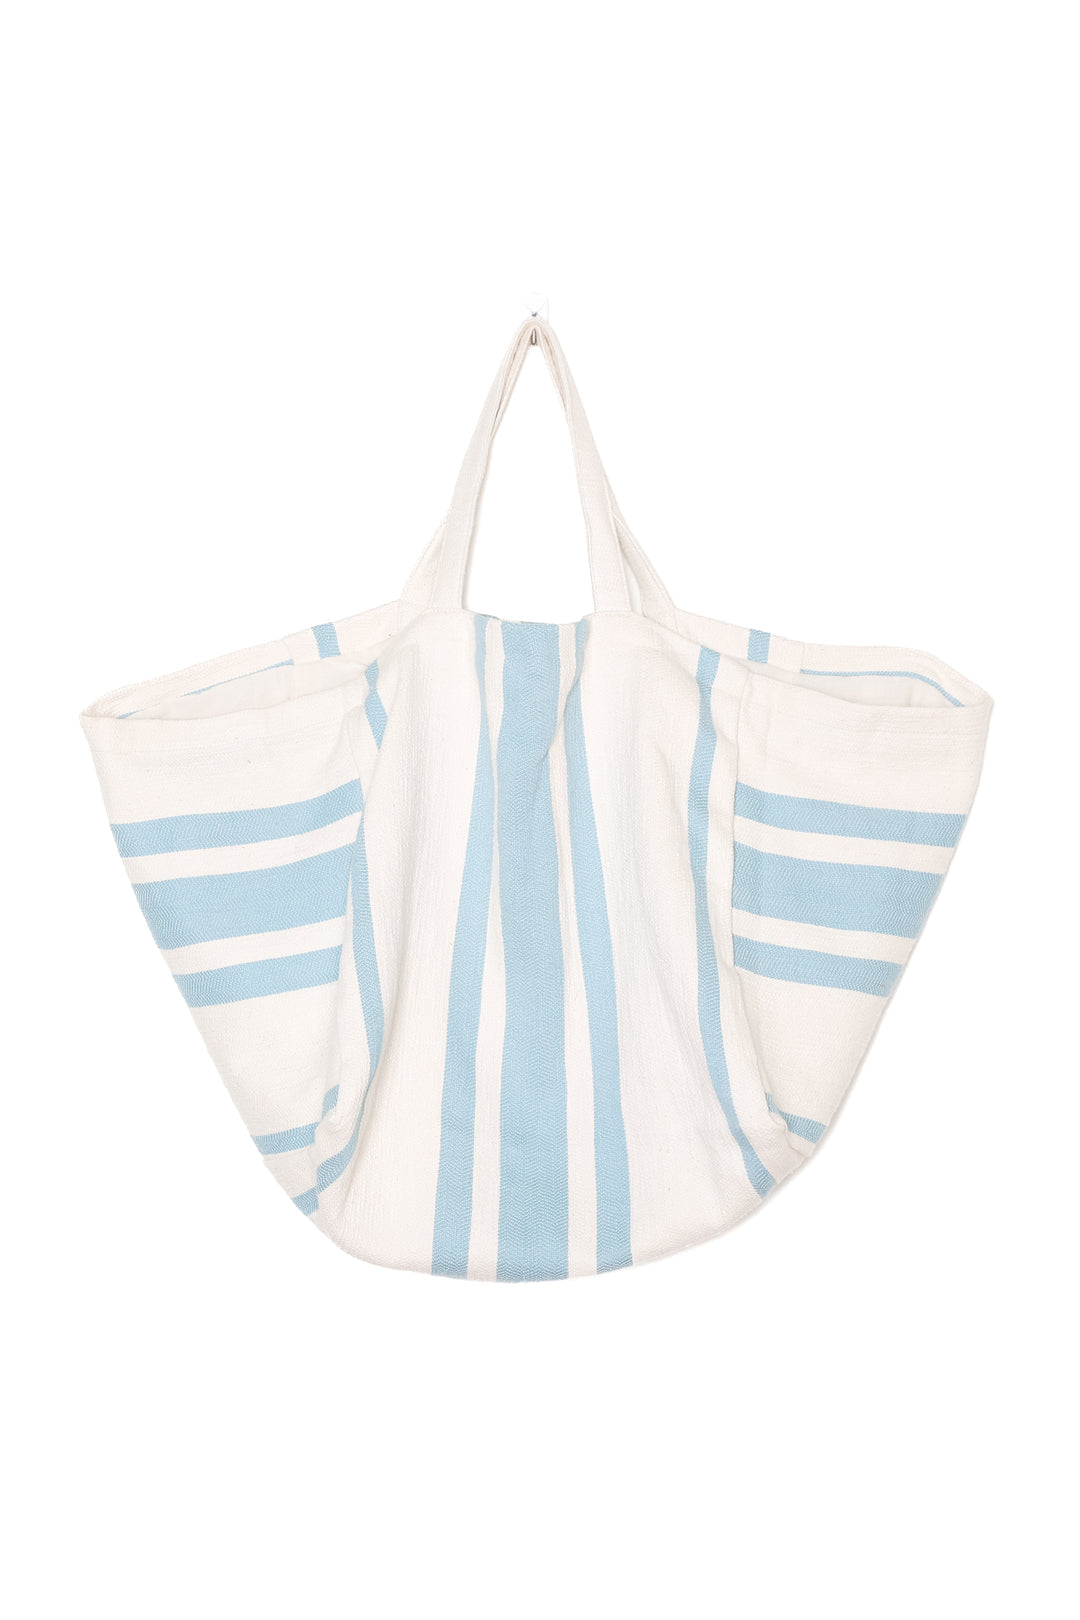 The Rey Tote Bag - Blue